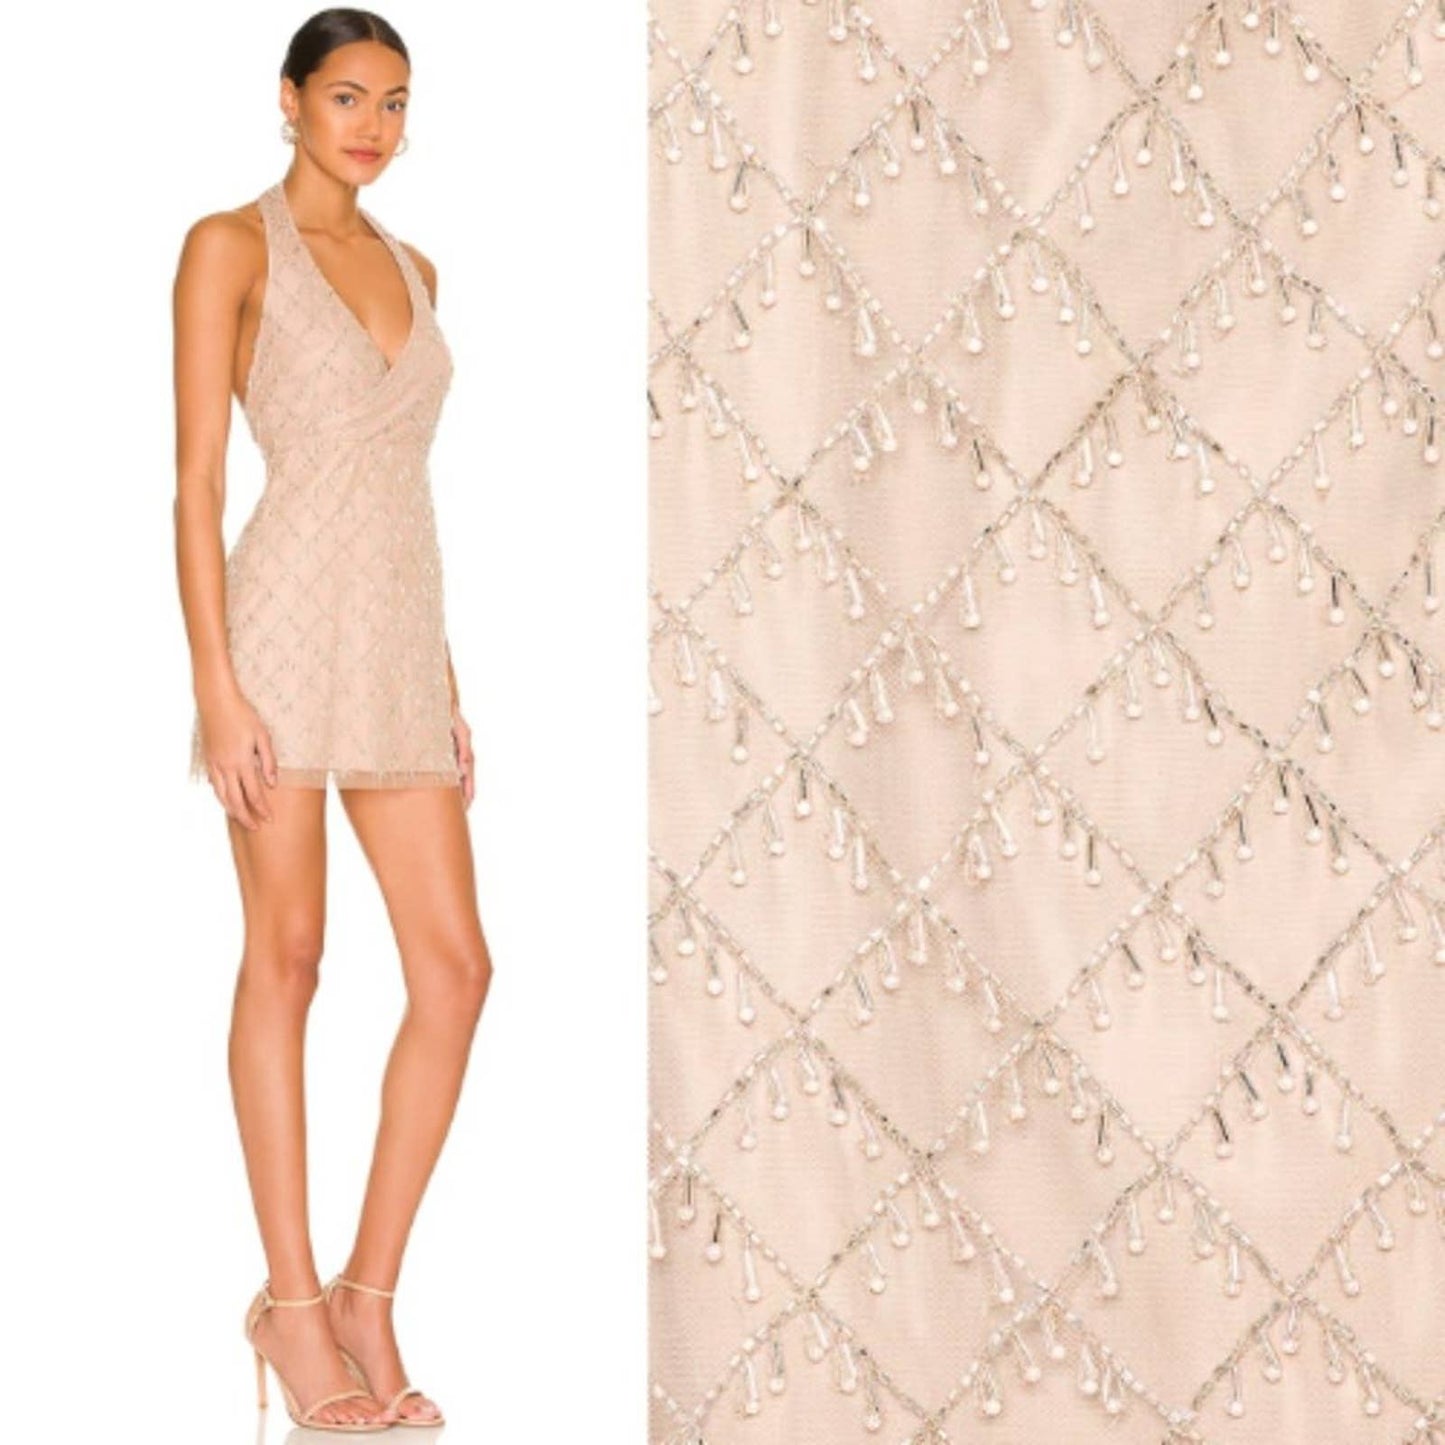 NBD Jerry Embellished Mini Dress in Nude NWT Size Small